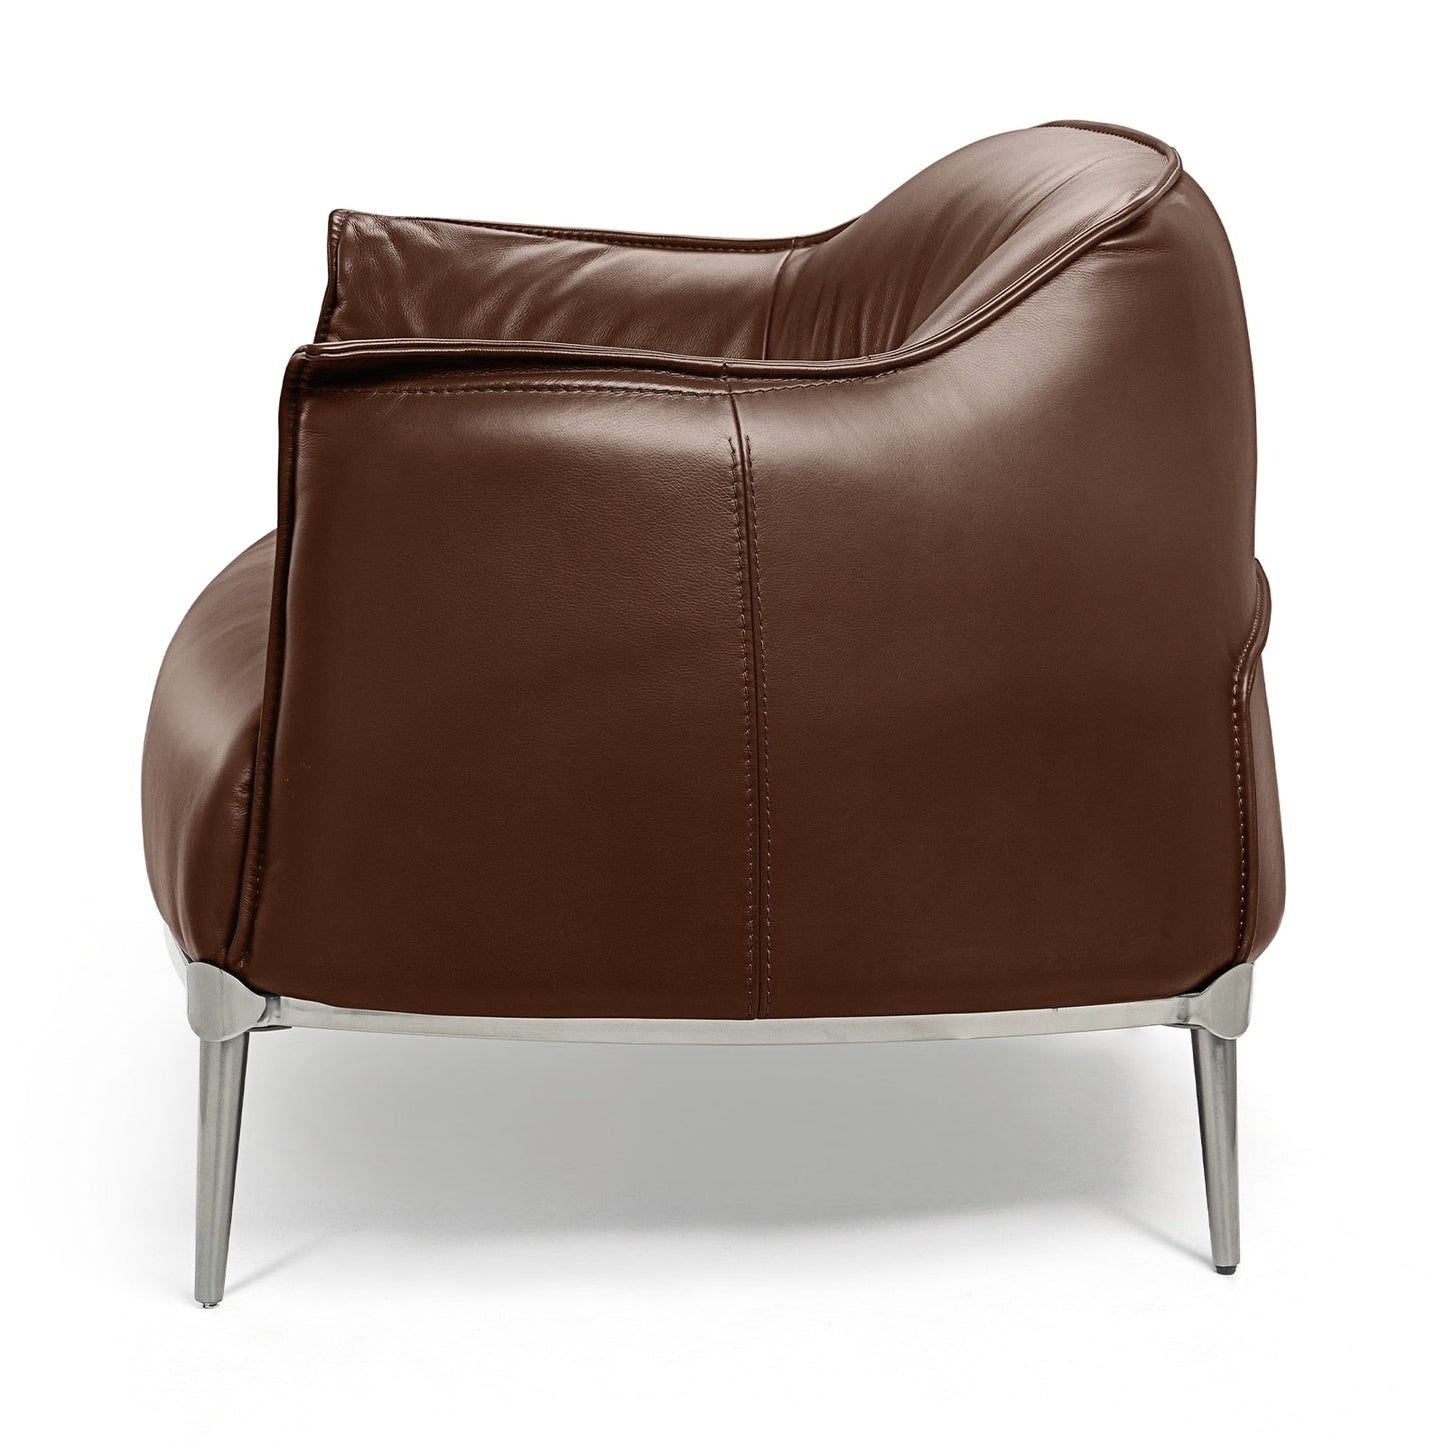 CORX Designs - Archibald Armchair by Jean-Marie Massaud with Genuine Italian Leather - Review